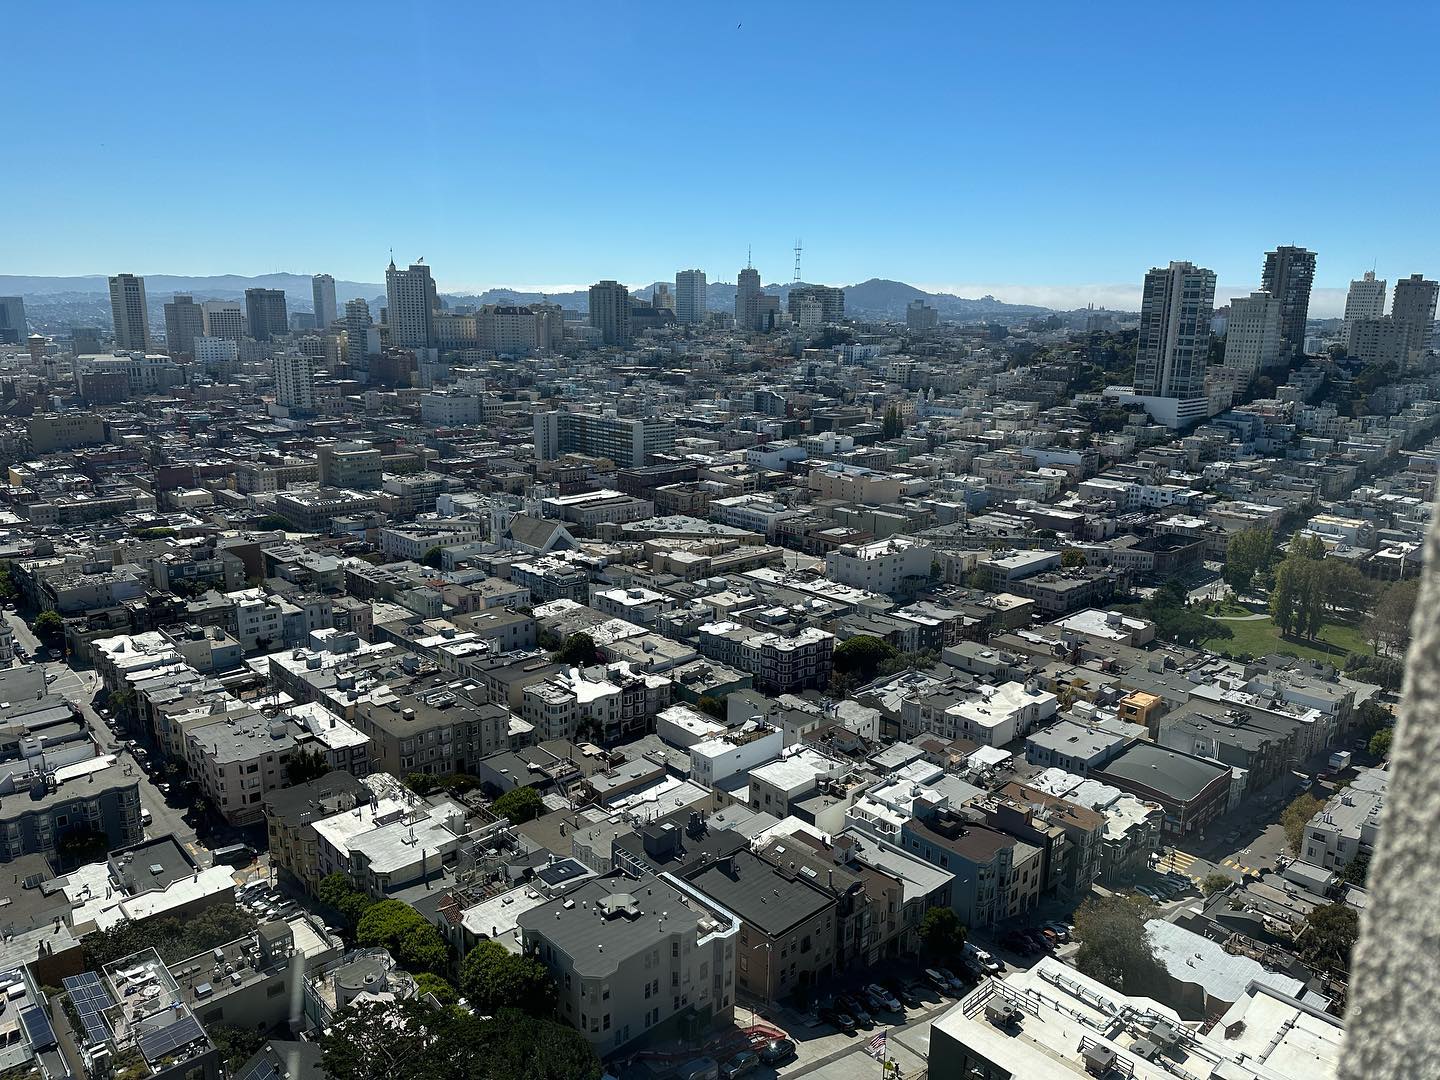 View of San Francisco from the top of Coit Tower, at the time the elevator didn't work and I had to take the stairs 🥵